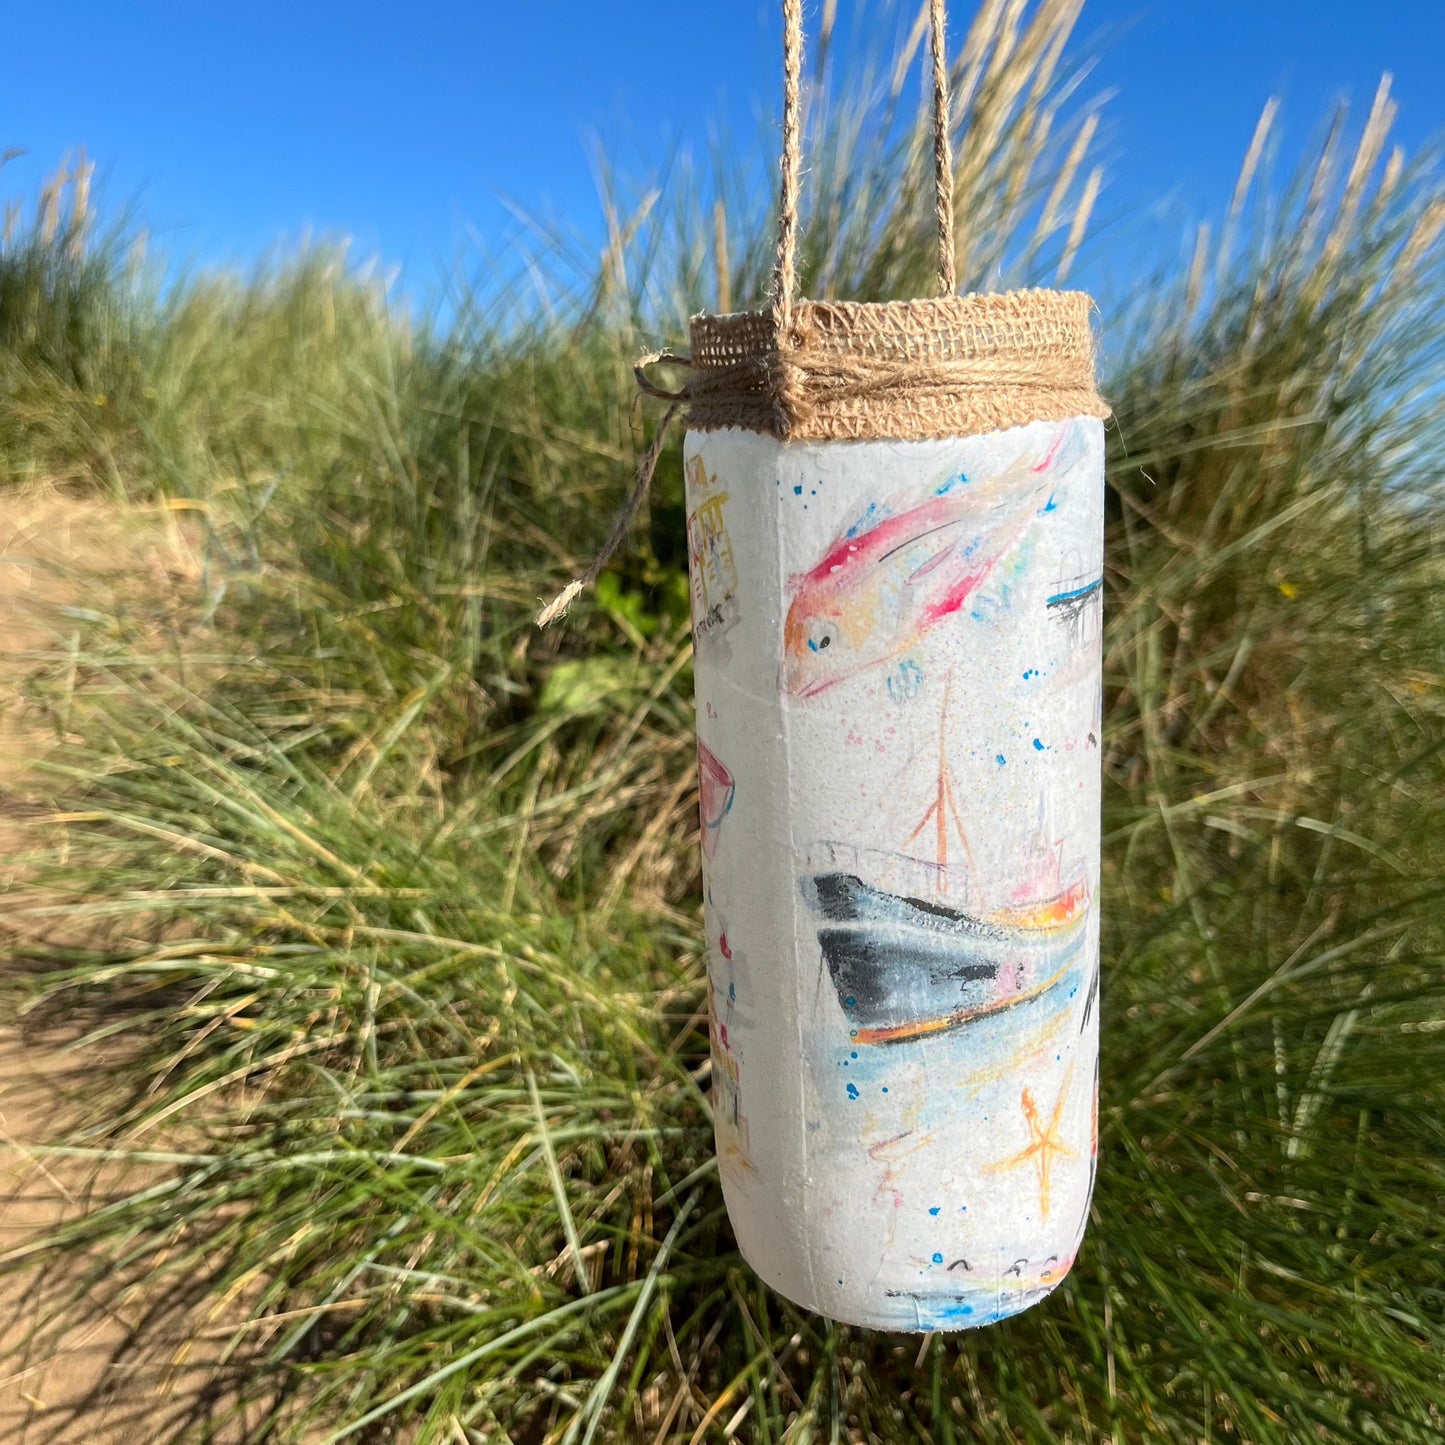 A decoupaged jar featuring watercolour illustrations of local landmarks in Grimsby and Cleethorpes by local artist, Eve Leoni Smith and Jollpotz. 